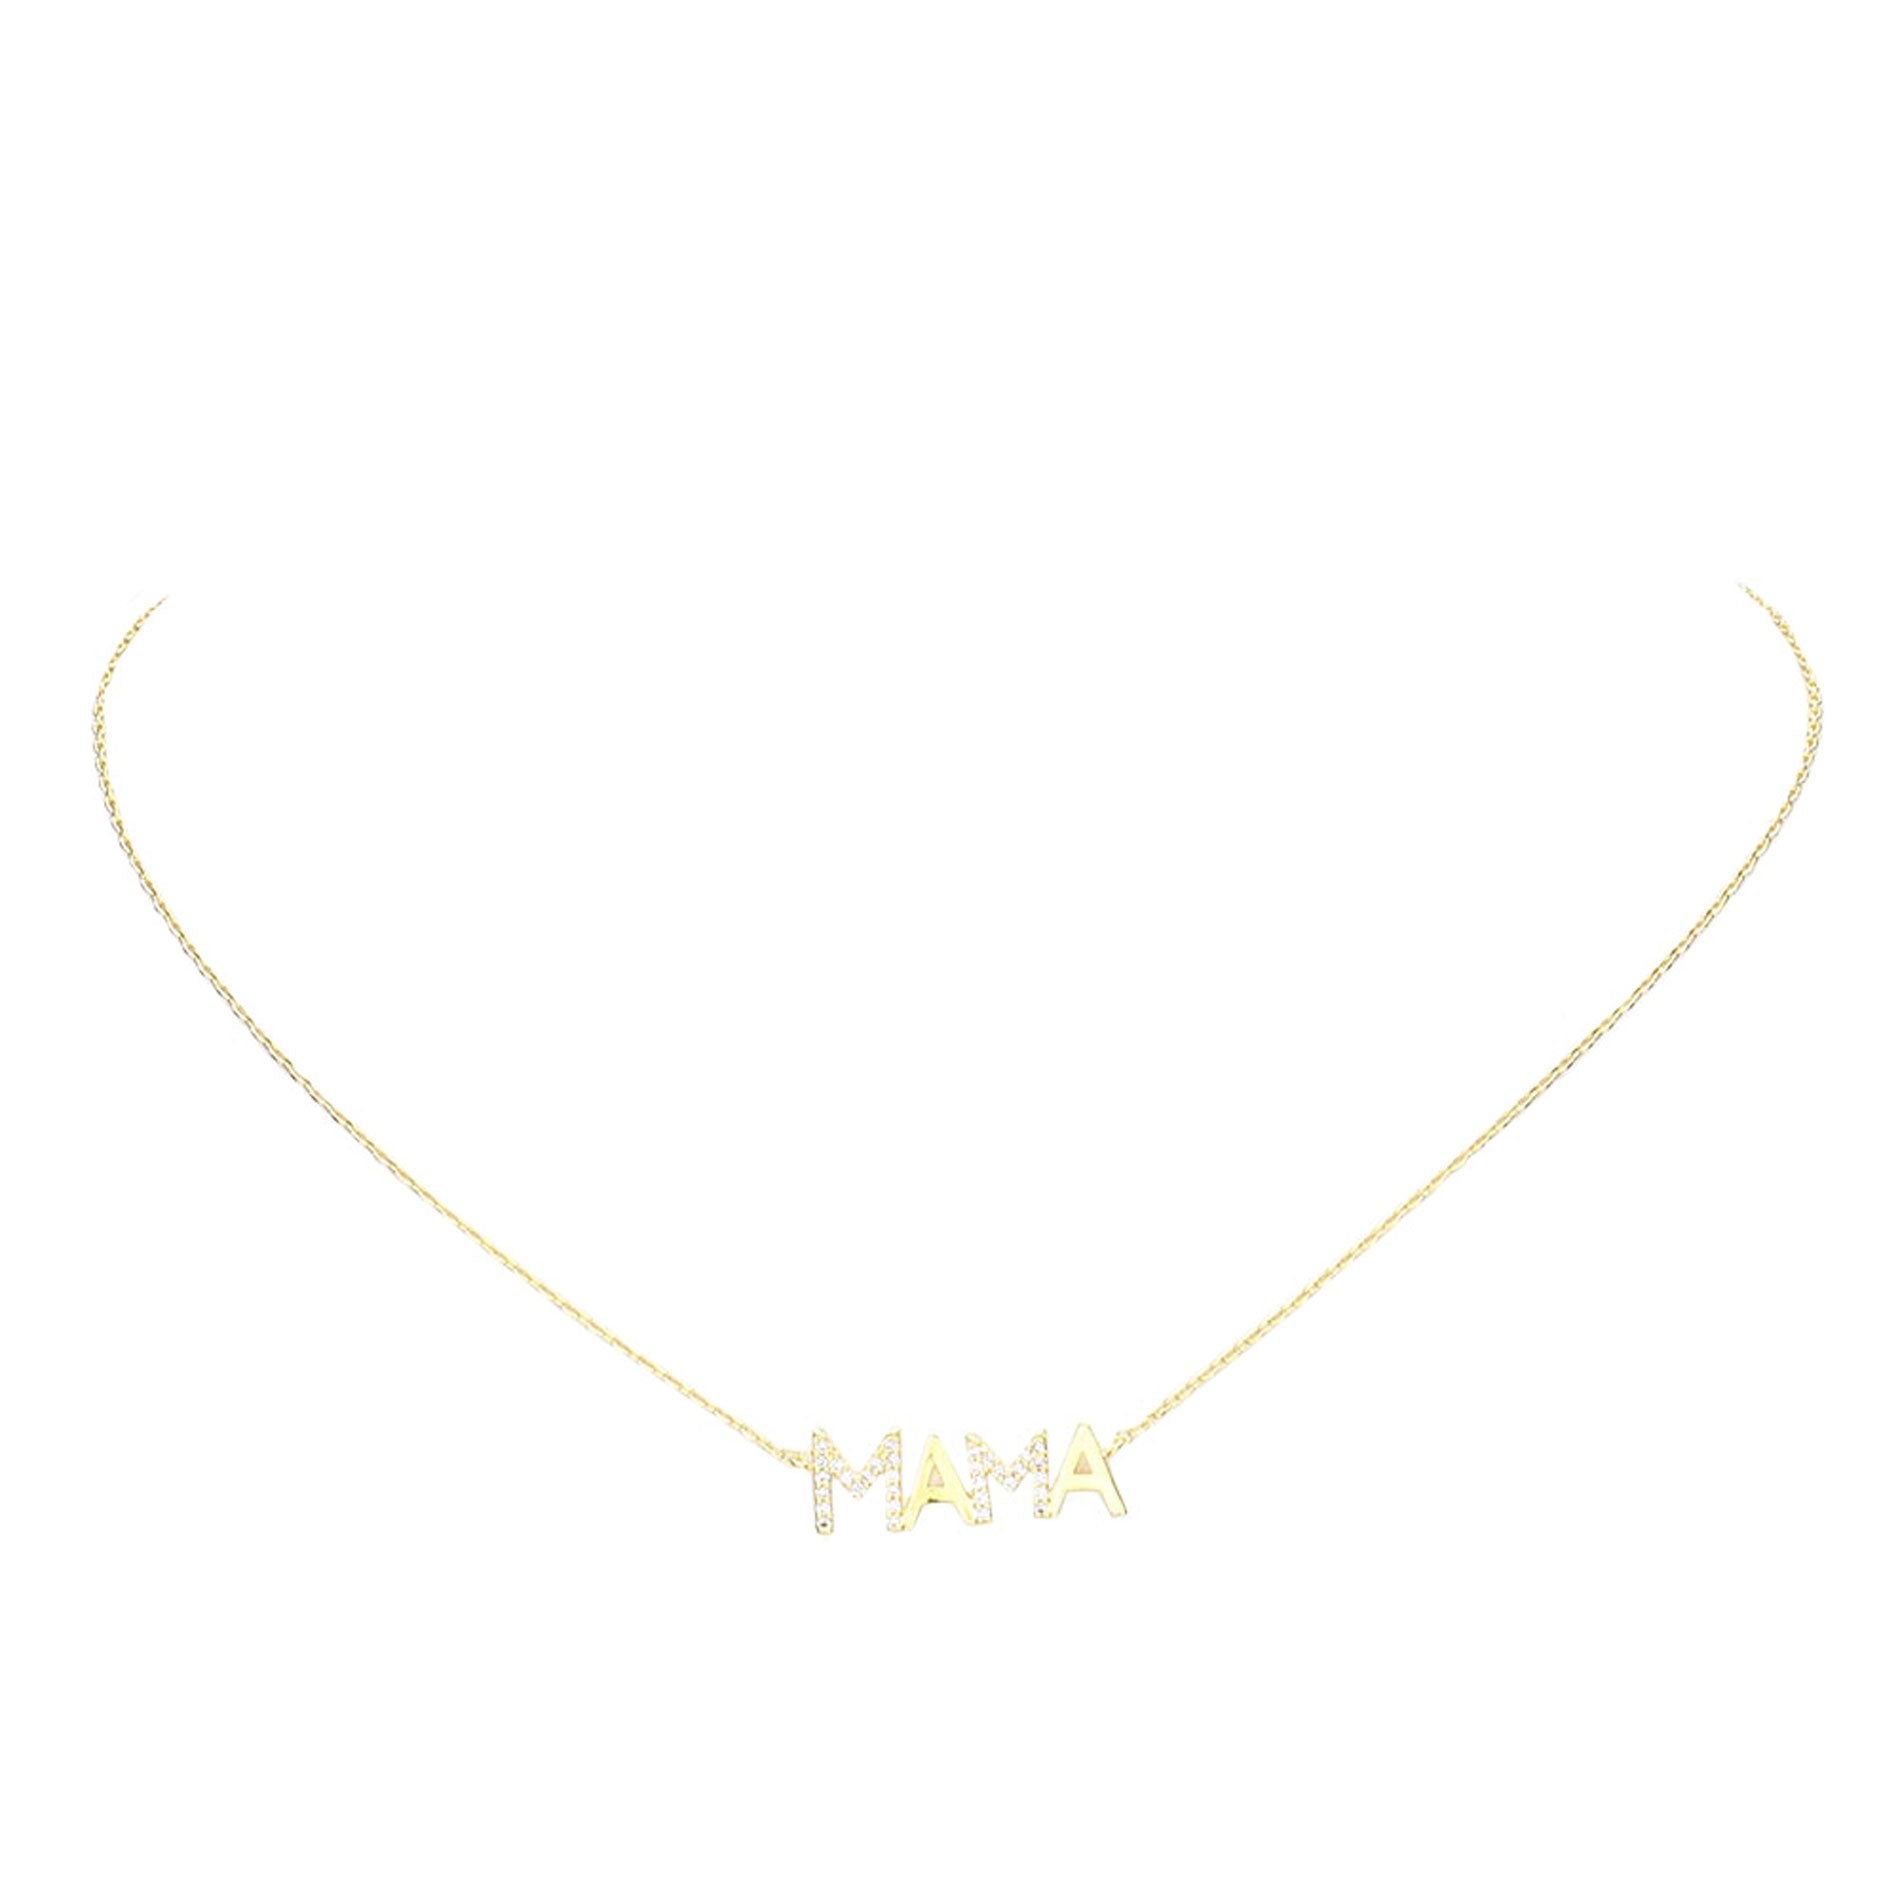 Buy 14K Gold Mama Necklace Personalized Handcrafted Necklace for Mom Mama  Necklace Mother's Day Gift Gift for Mom Gift for Her Online in India - Etsy